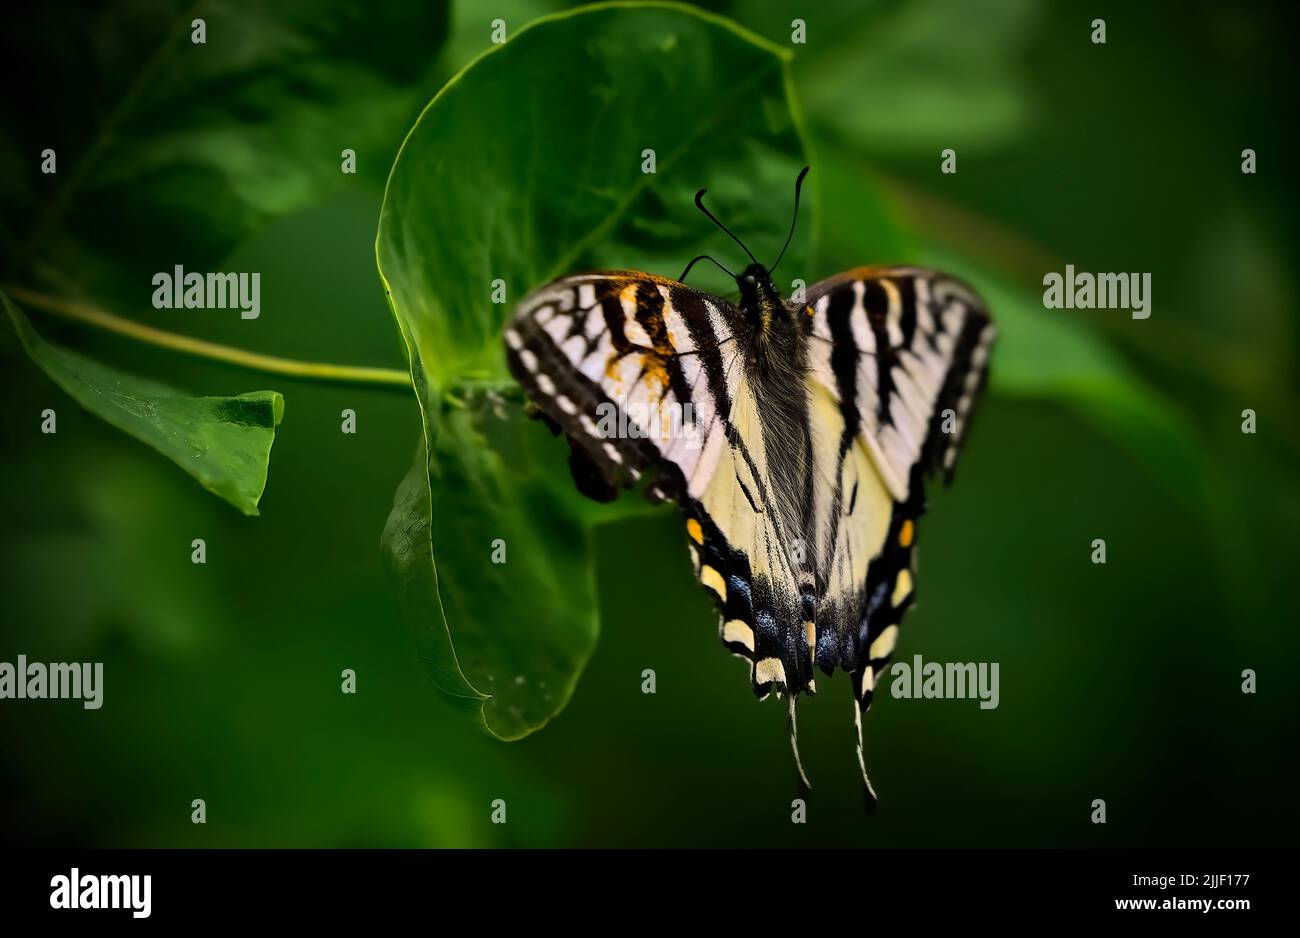 Eastern Tiger Swallowtail, Papilio glaucus, rests on a plant leaves in rural Alberta Canada Stock Photo